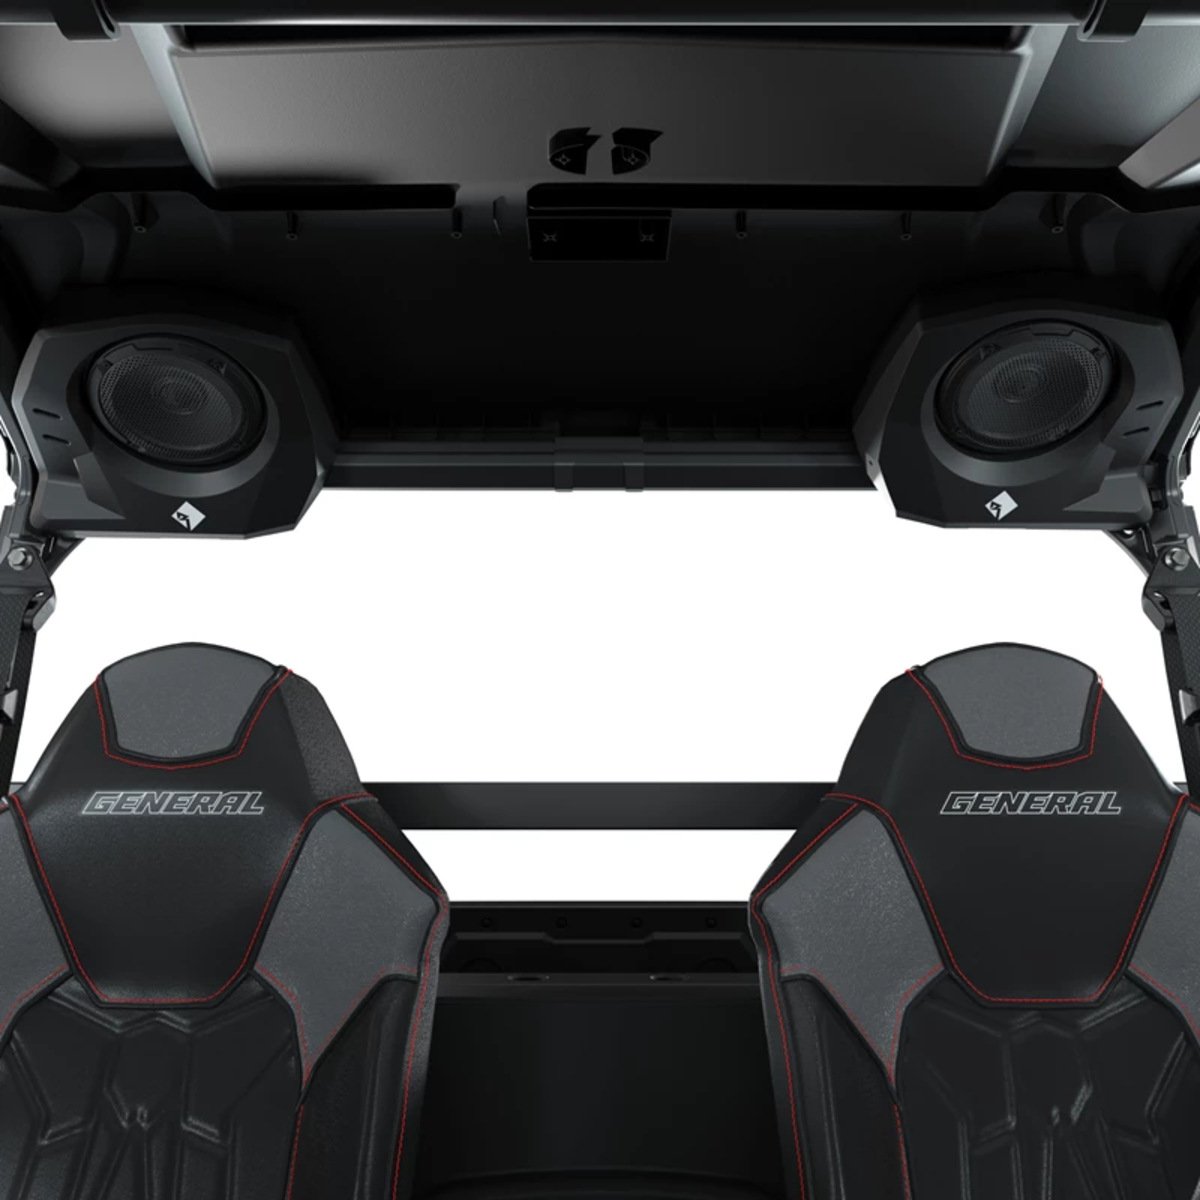 Polaris General Ride Command Audio Kit + Rear Speakers by Rockford Fosgate - Stage 2